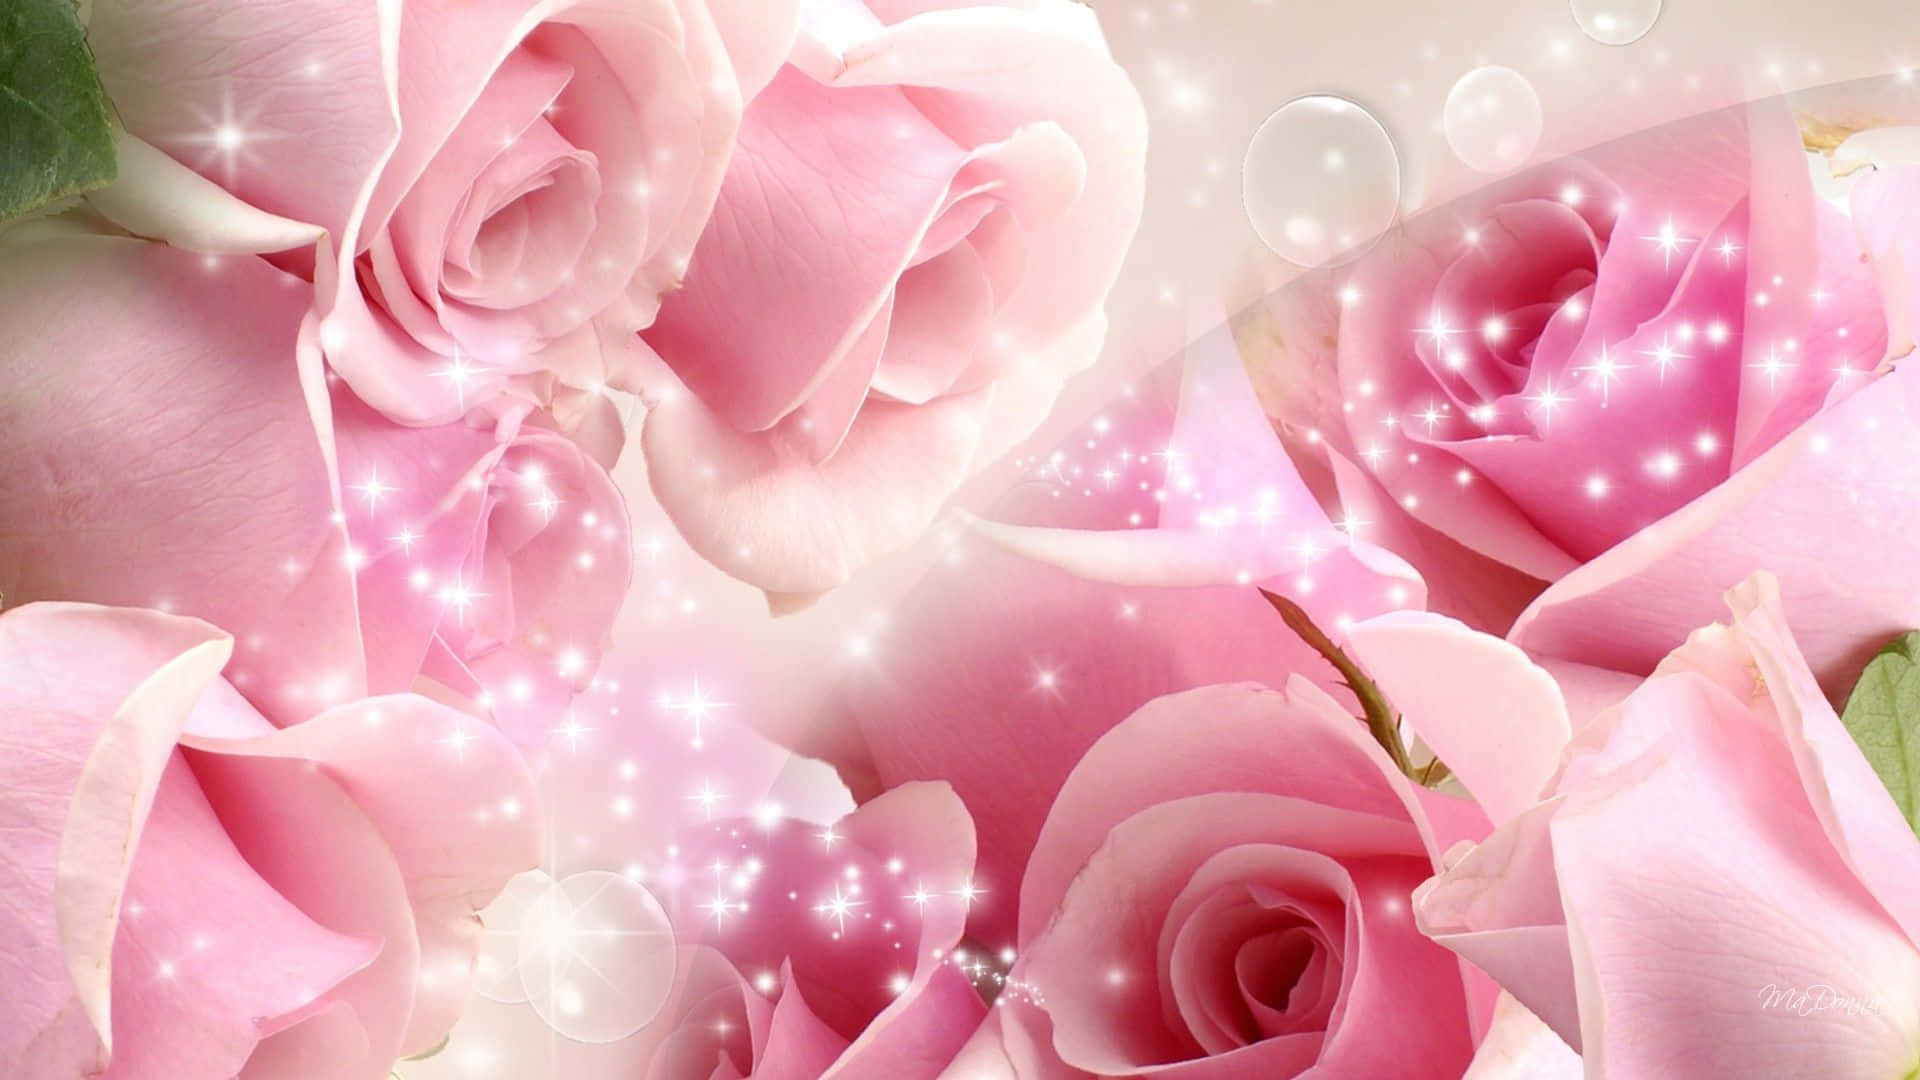 Pink Roses With Stars And Bubbles